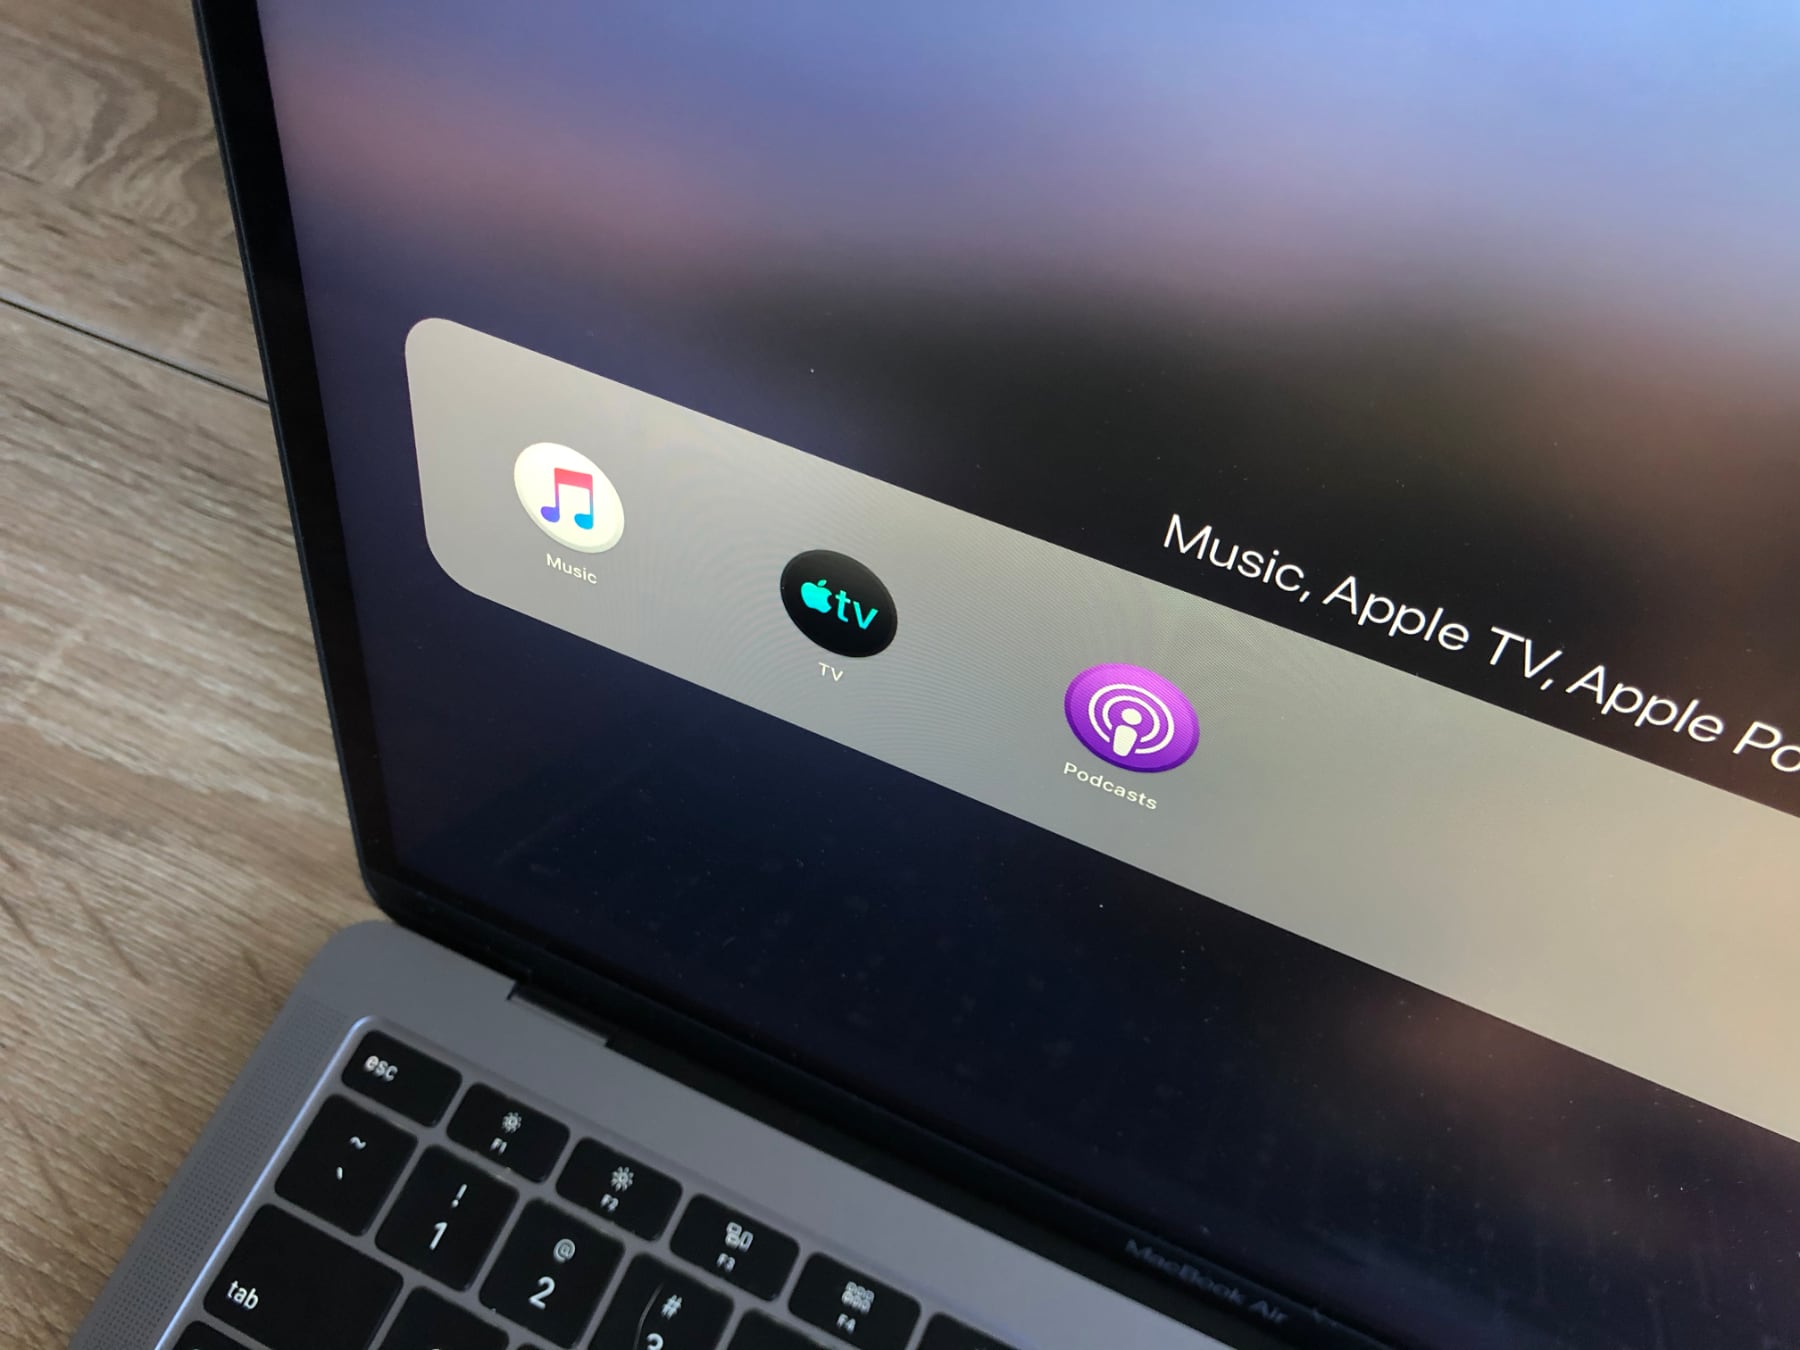 Apple Music Apple TV and Apple Podcasts App on new MacBook Air with macOS Catalina